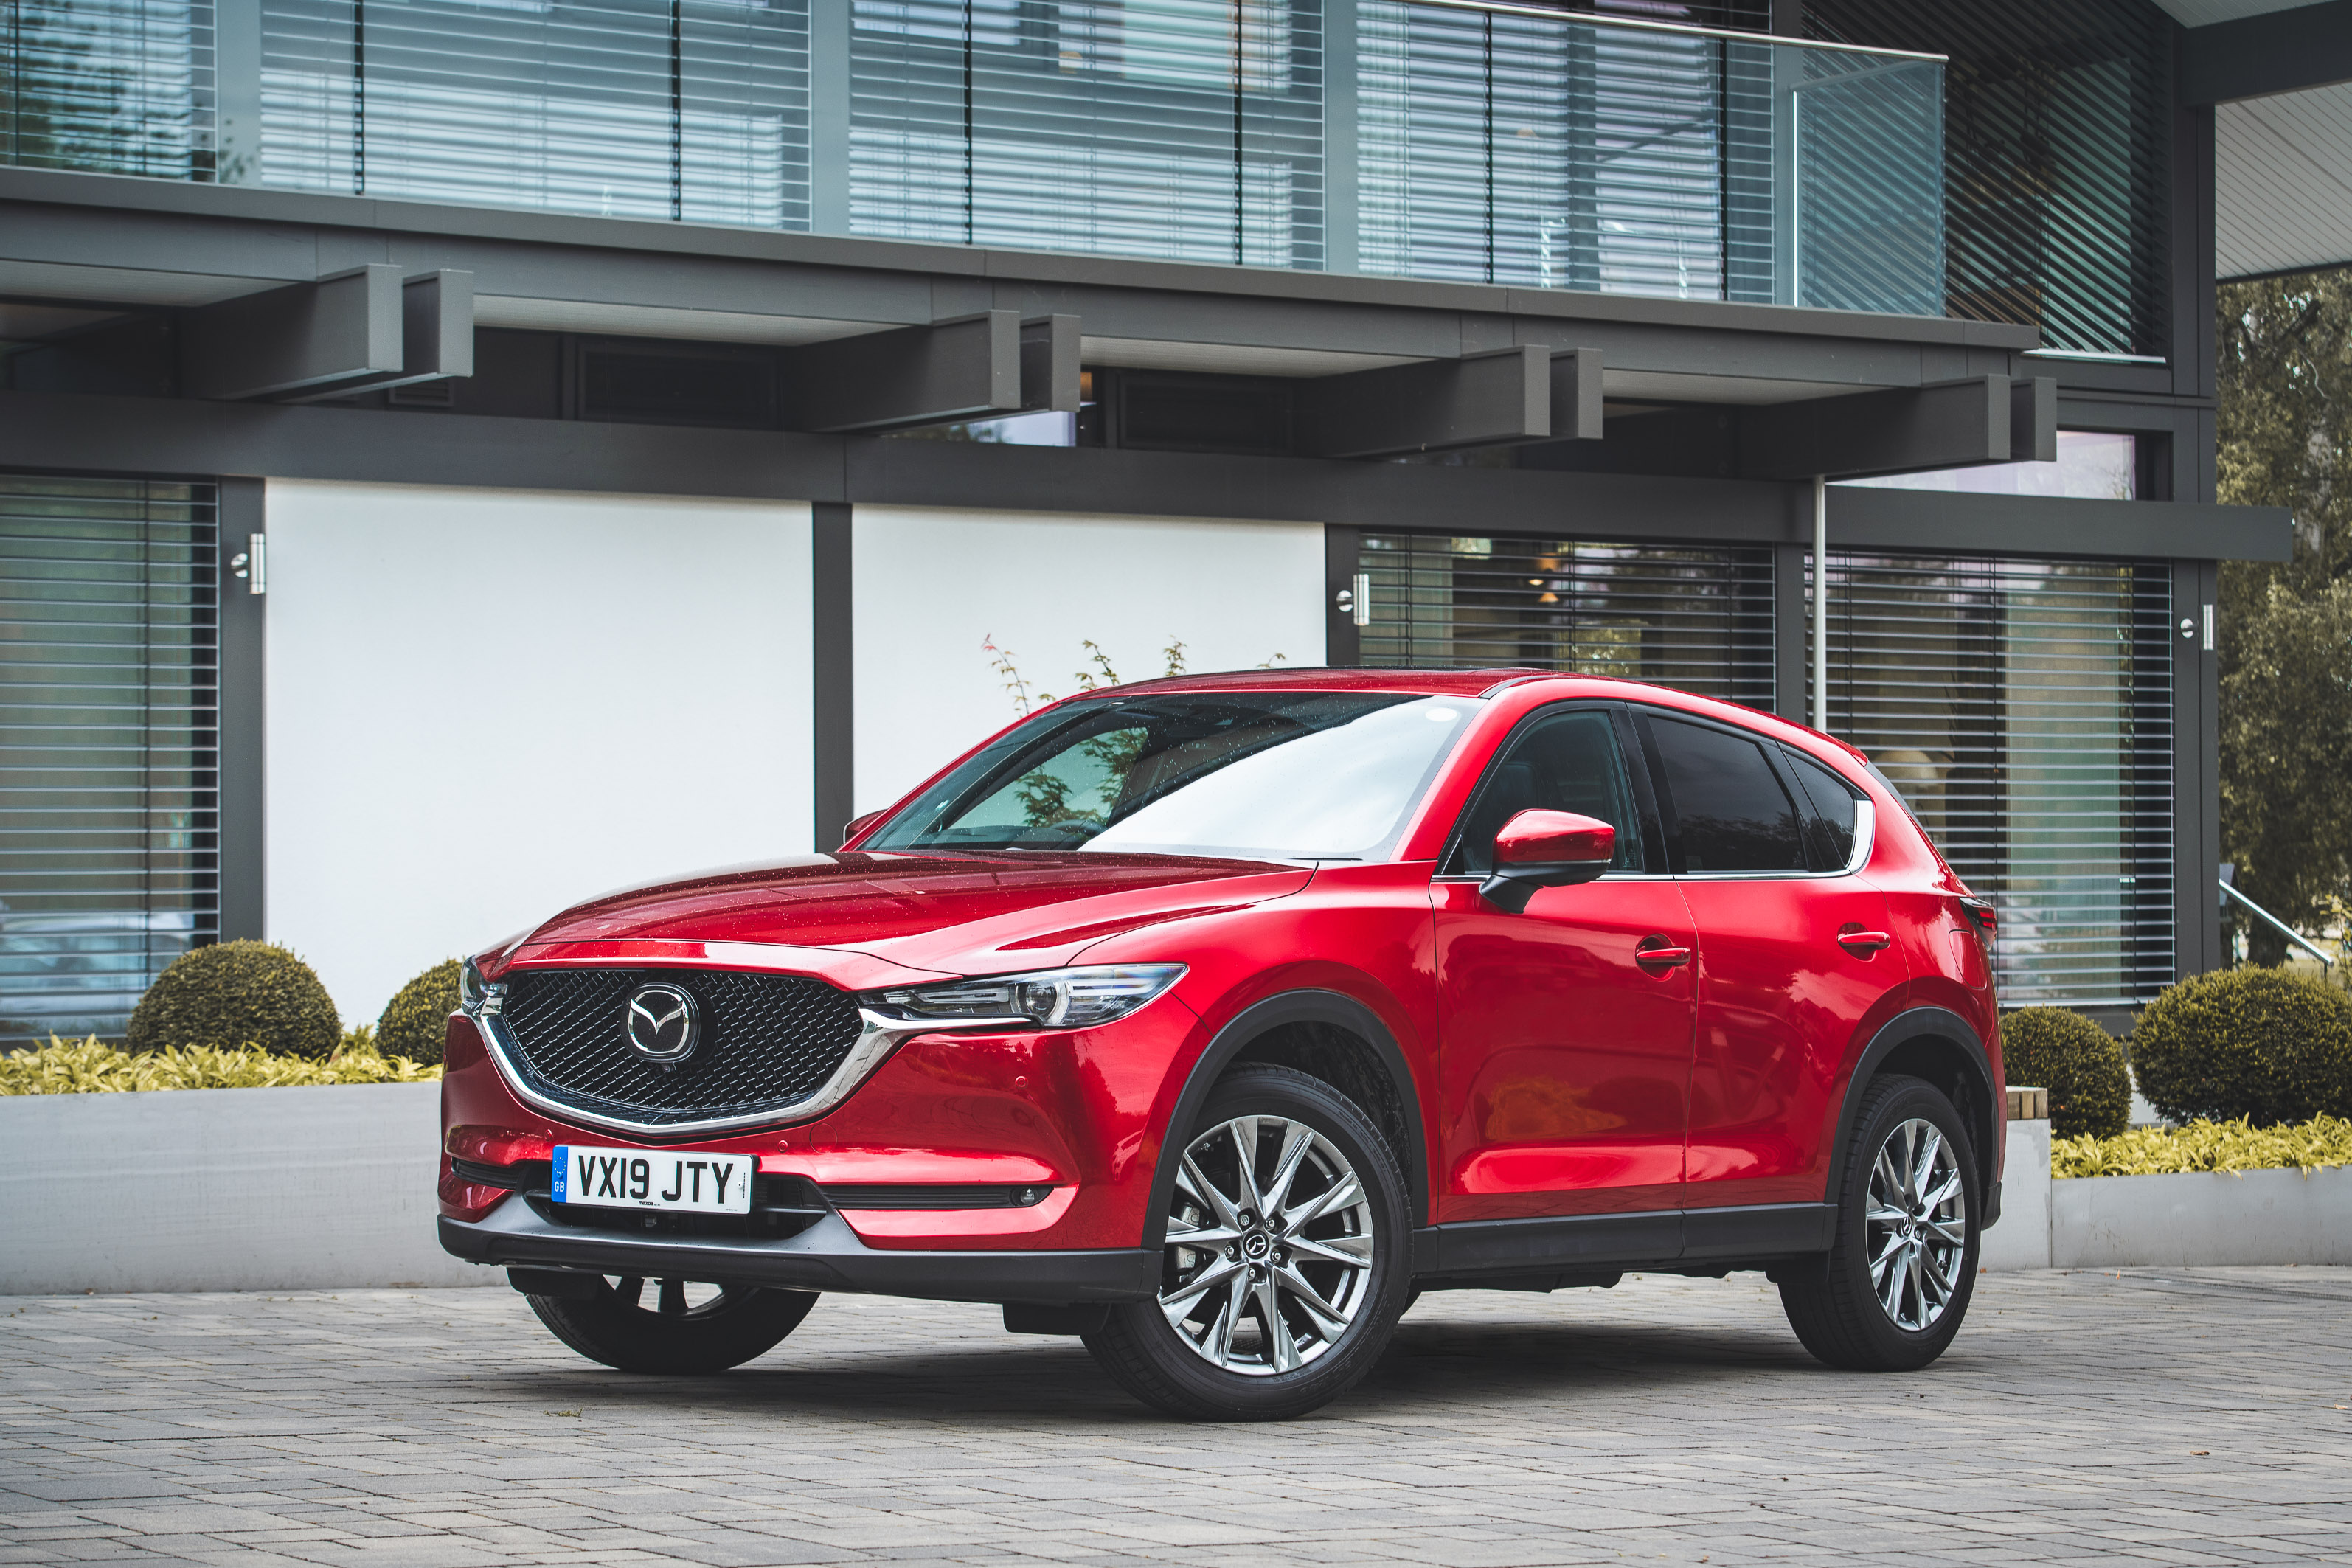 Mazda customers can save up to £6,000 on competitive scrappage upgrade